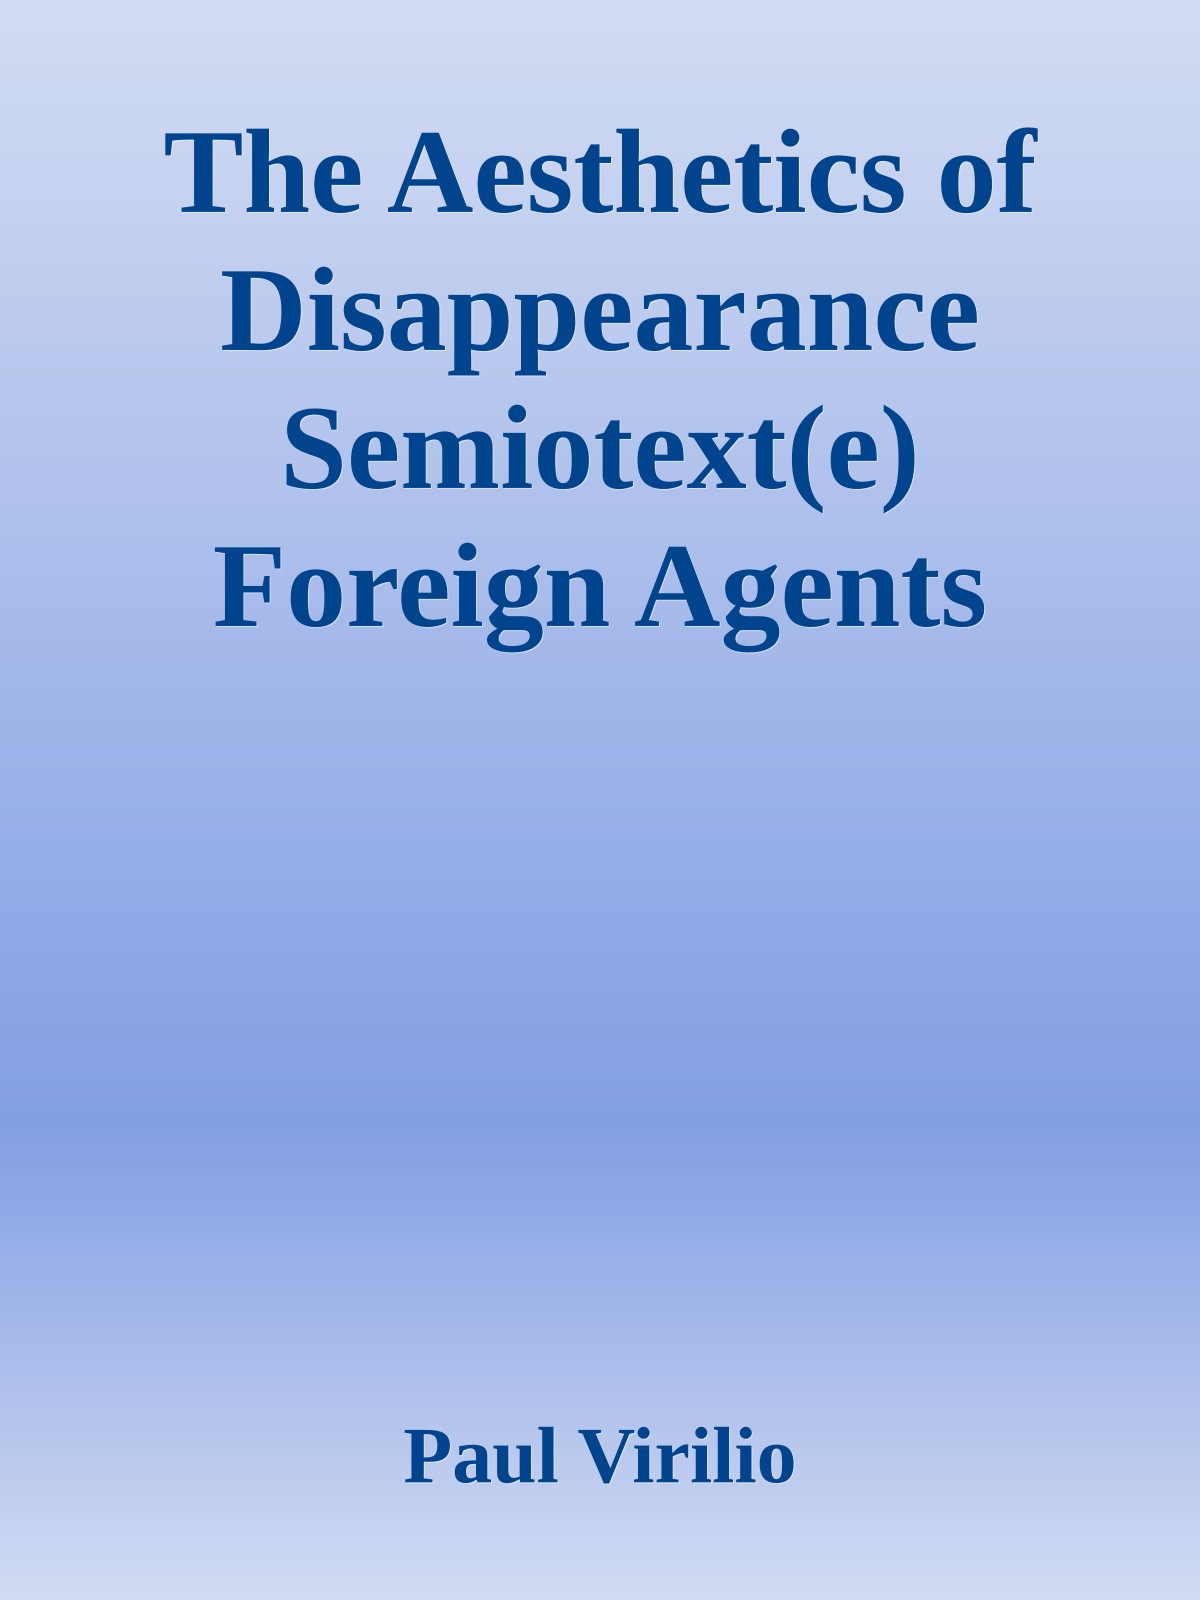 The Aesthetics of Disappearance Semiotext(e) Foreign Agents